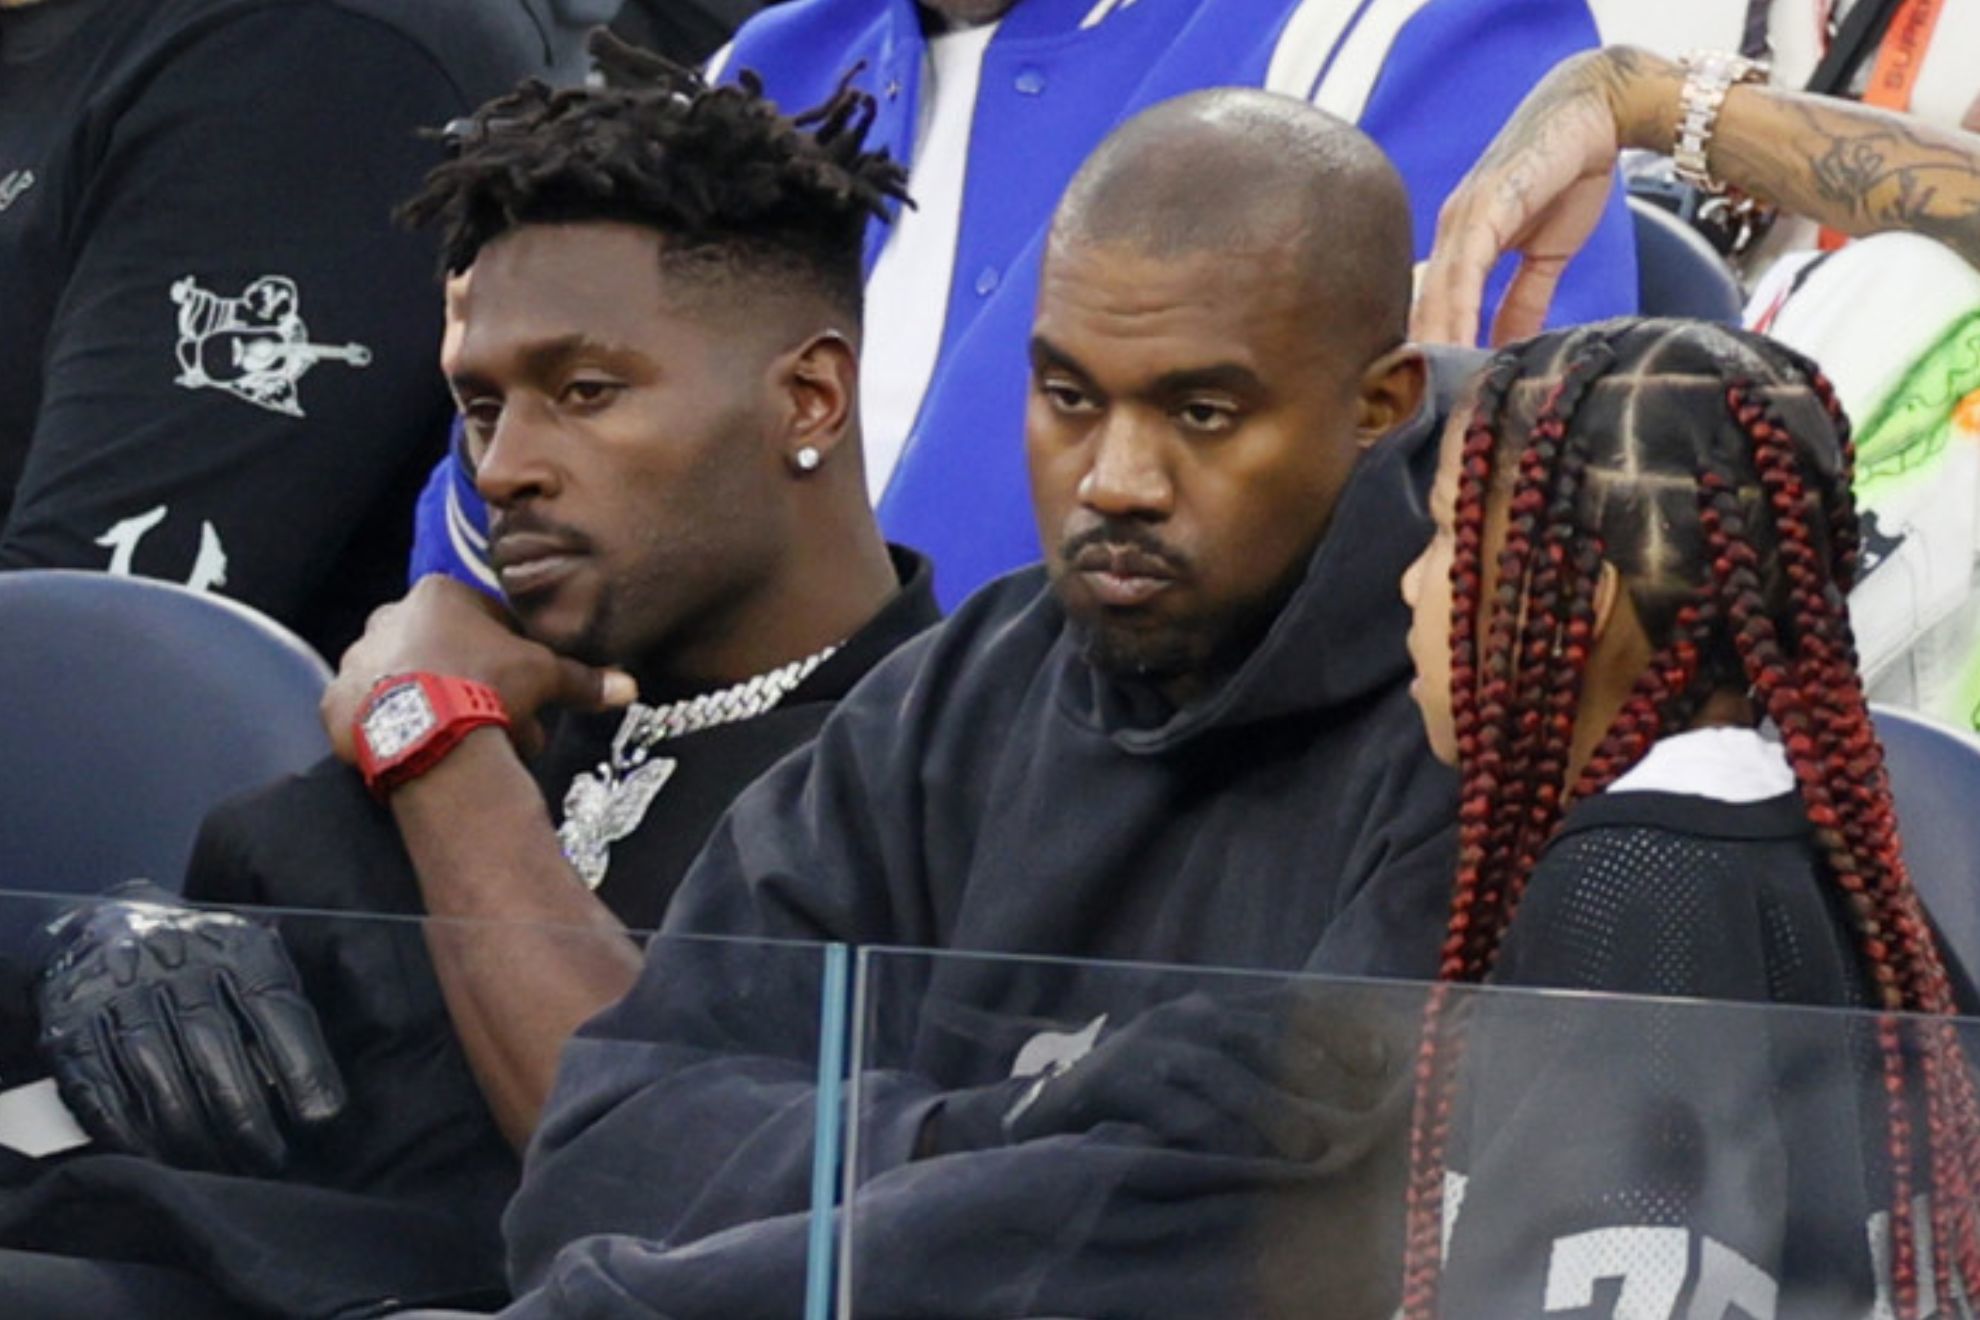 Antonio Brown and Kanye West have been friends for the past year. Ye made Brown president of Donda Sports back in February.